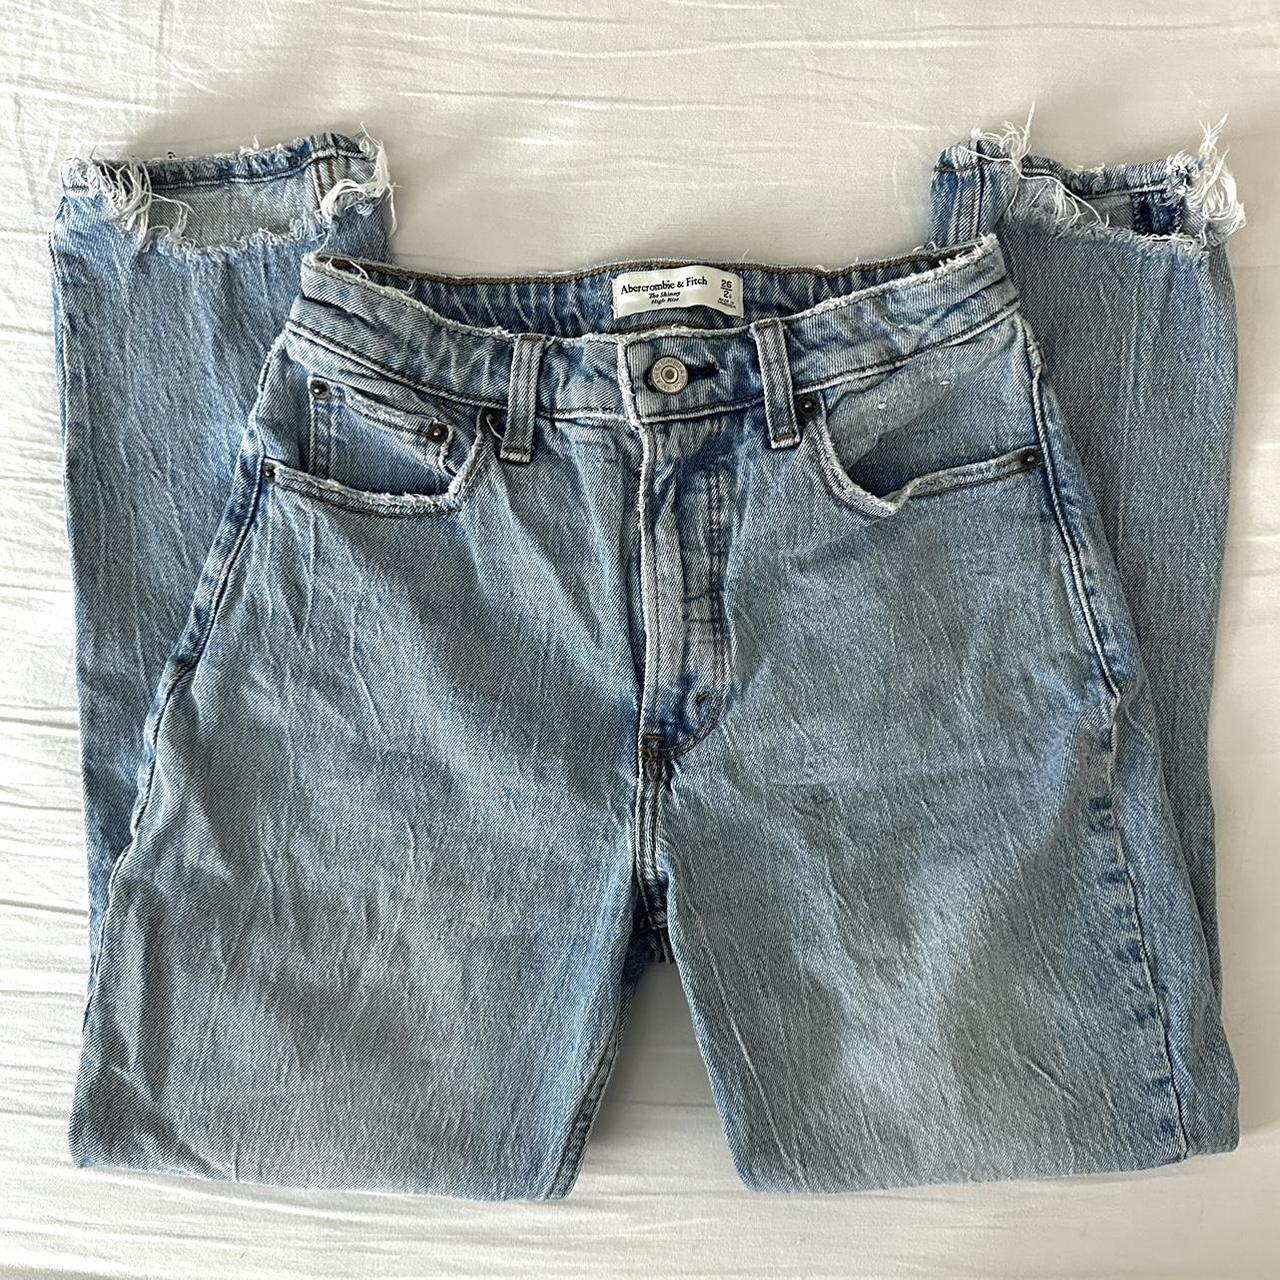 Abercrombie and Fitch Curve Love Jeans 👖 The Skinny... - Depop